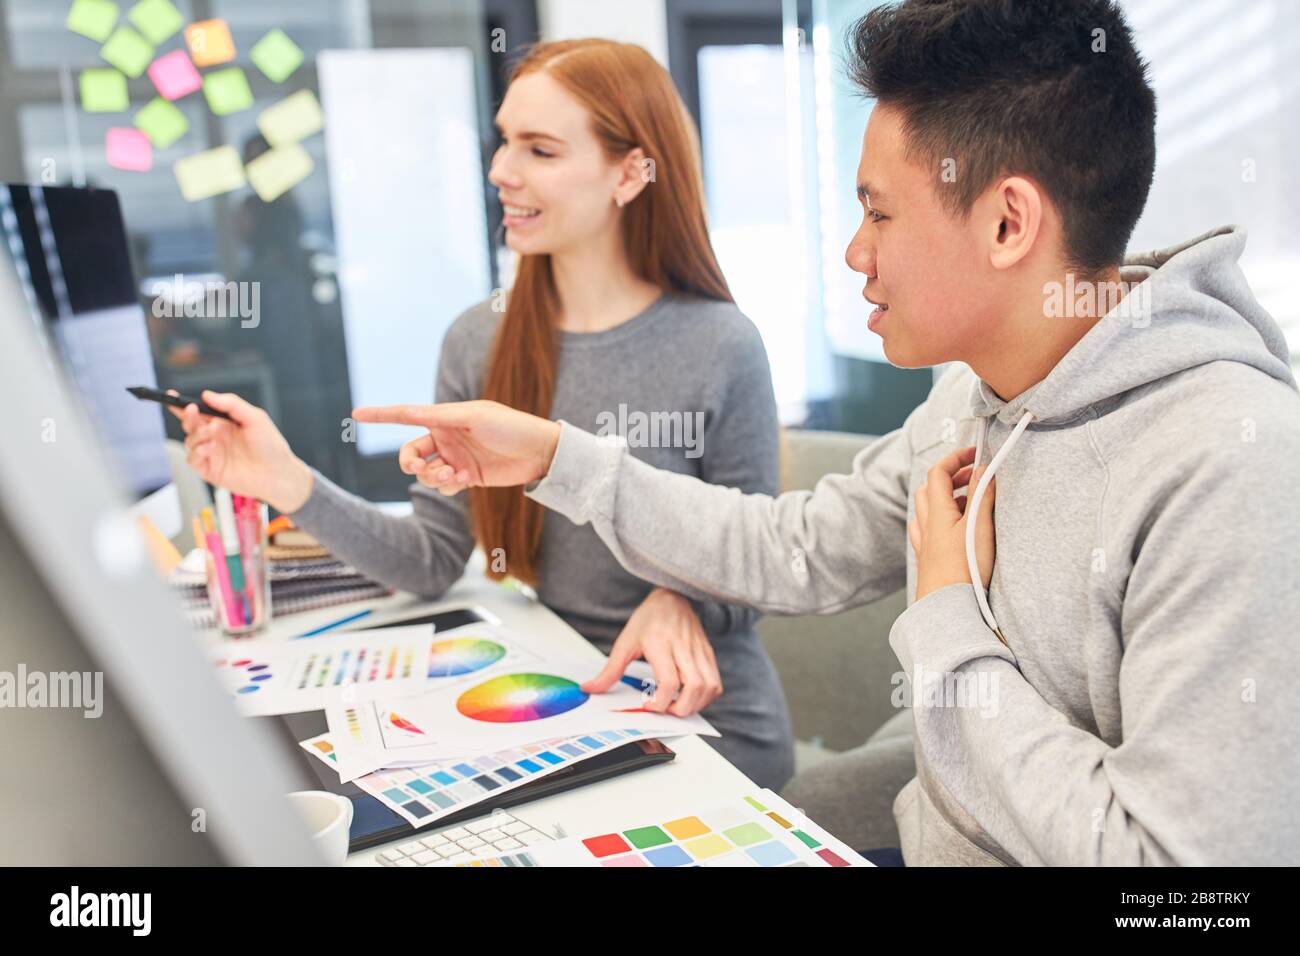 Two graphic designers or developers find a color design solution for a project Stock Photo